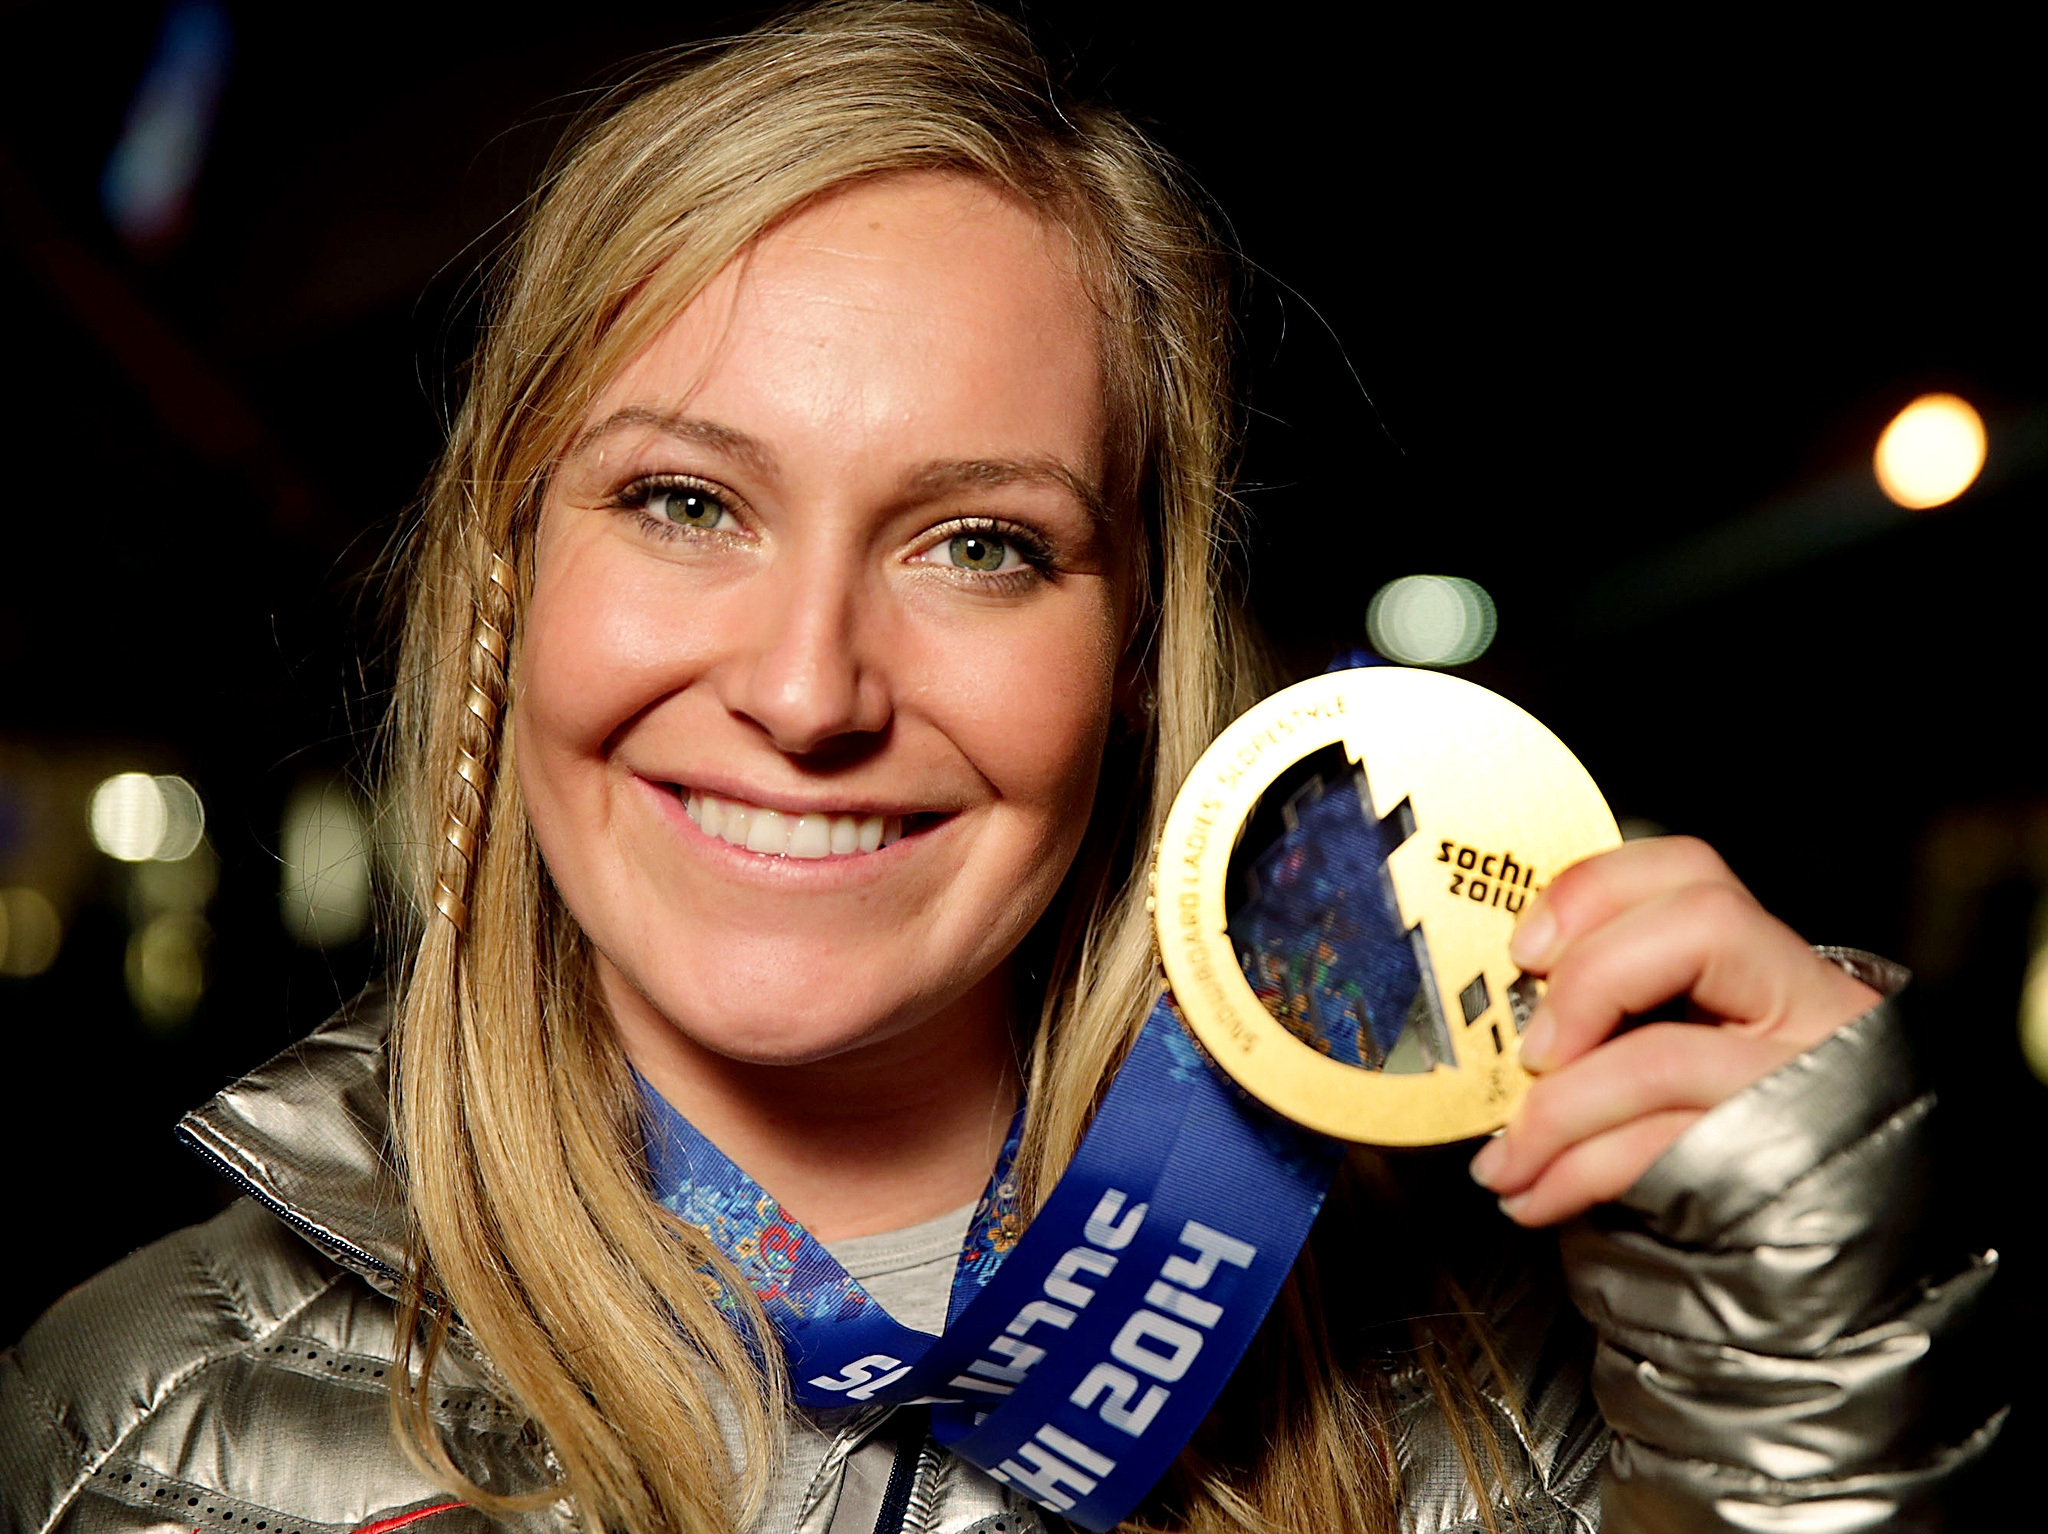 Snowboarder Jamie Anderson Of The United States Won Gold